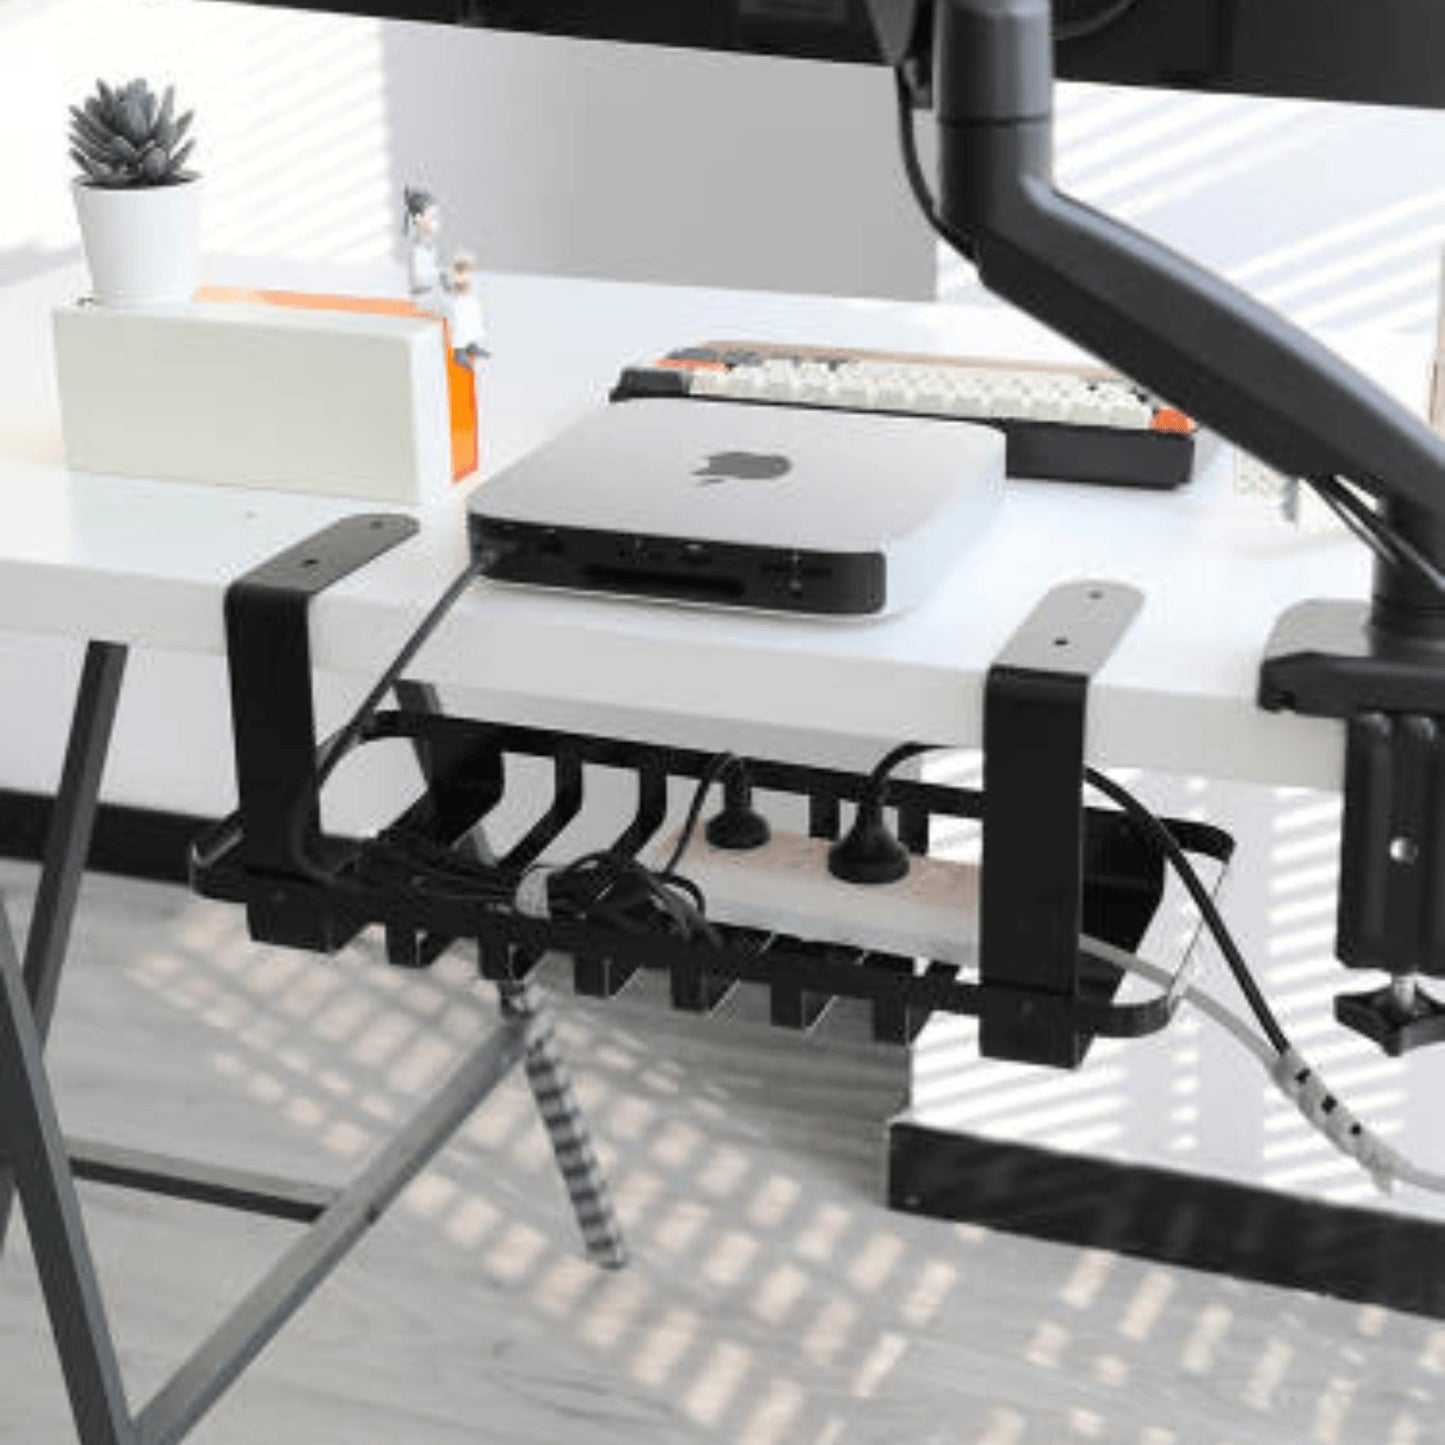 Cable Management Tray Organizer Under Desk for Office and Home No Drill/Stick Option - GADGET WAGON Desk Arm